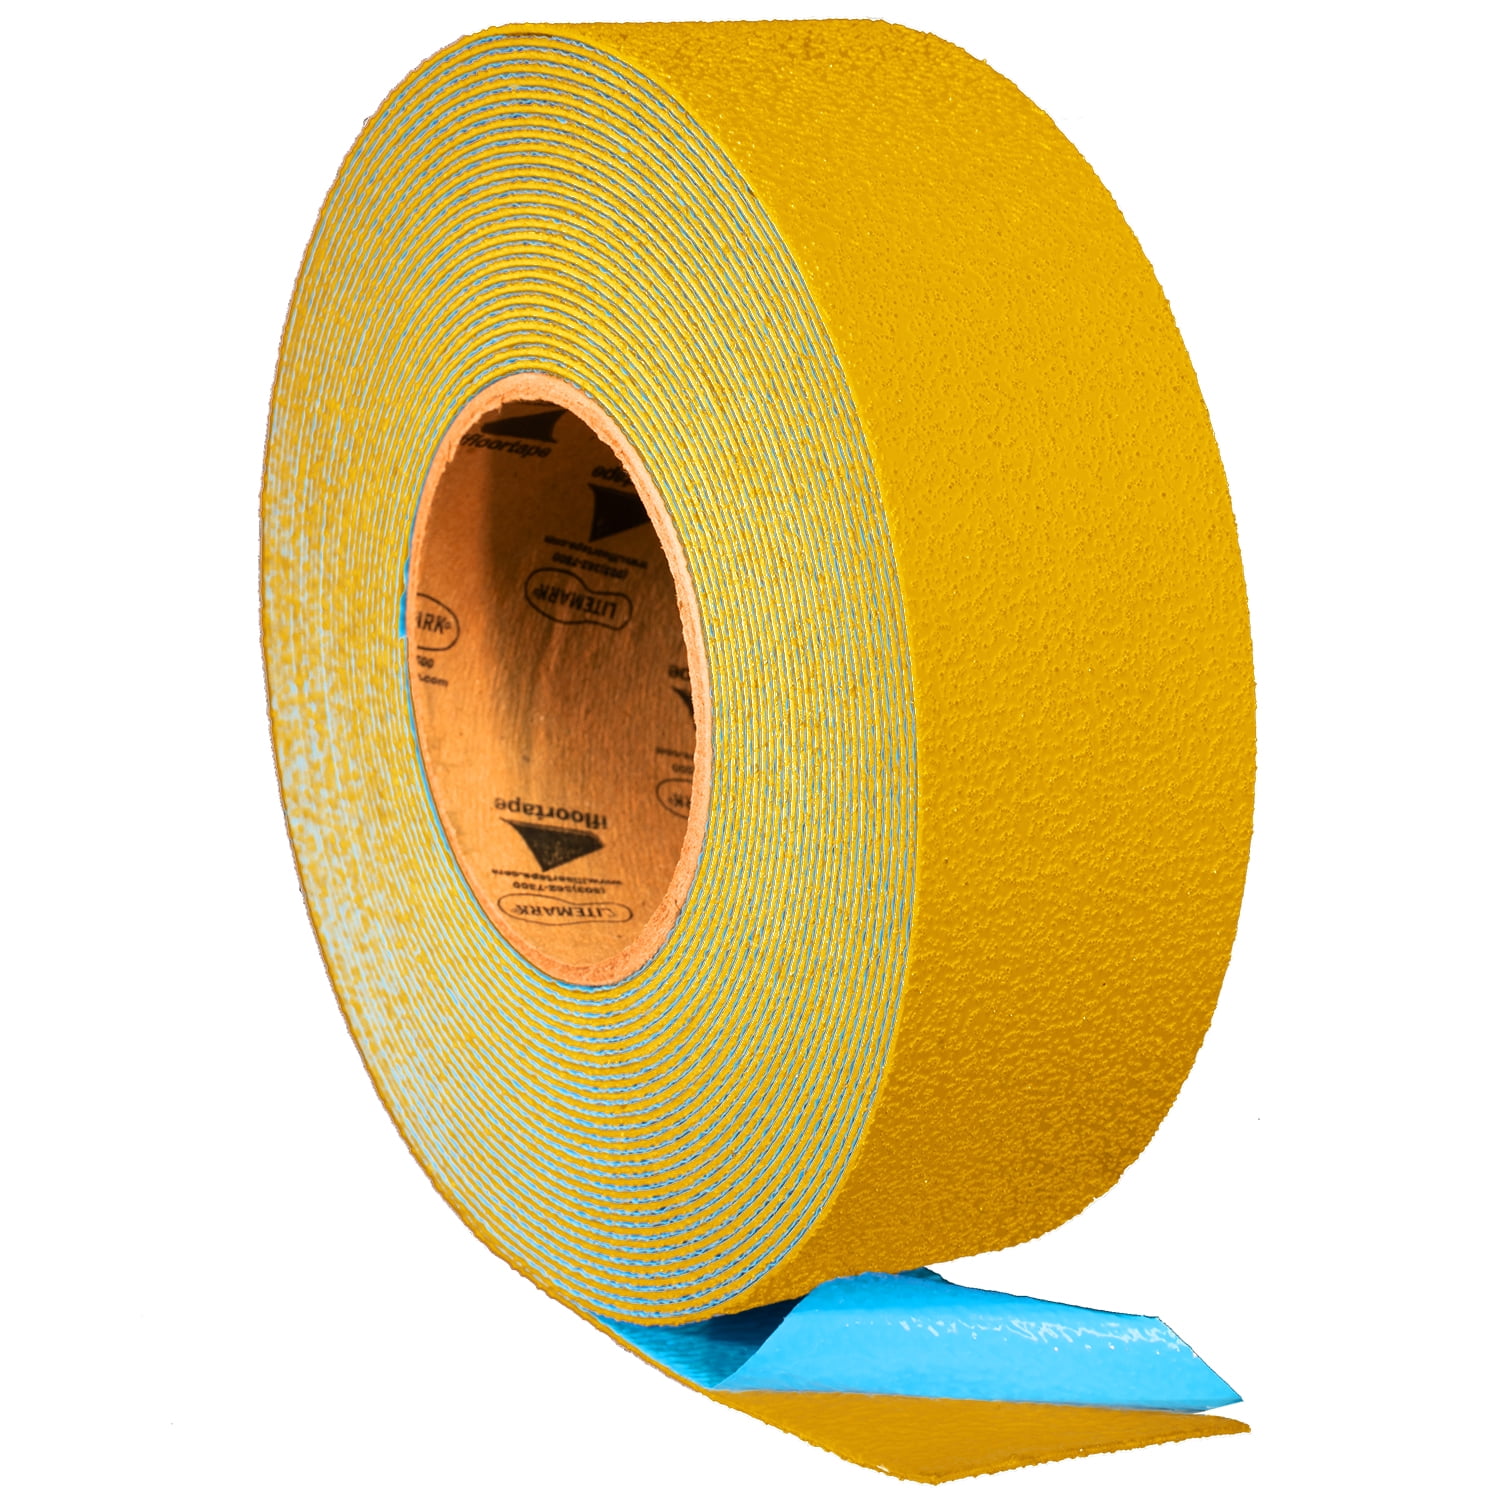 3M Scotchlite Reflective Tape, 3M Tapes, Hoop Tape